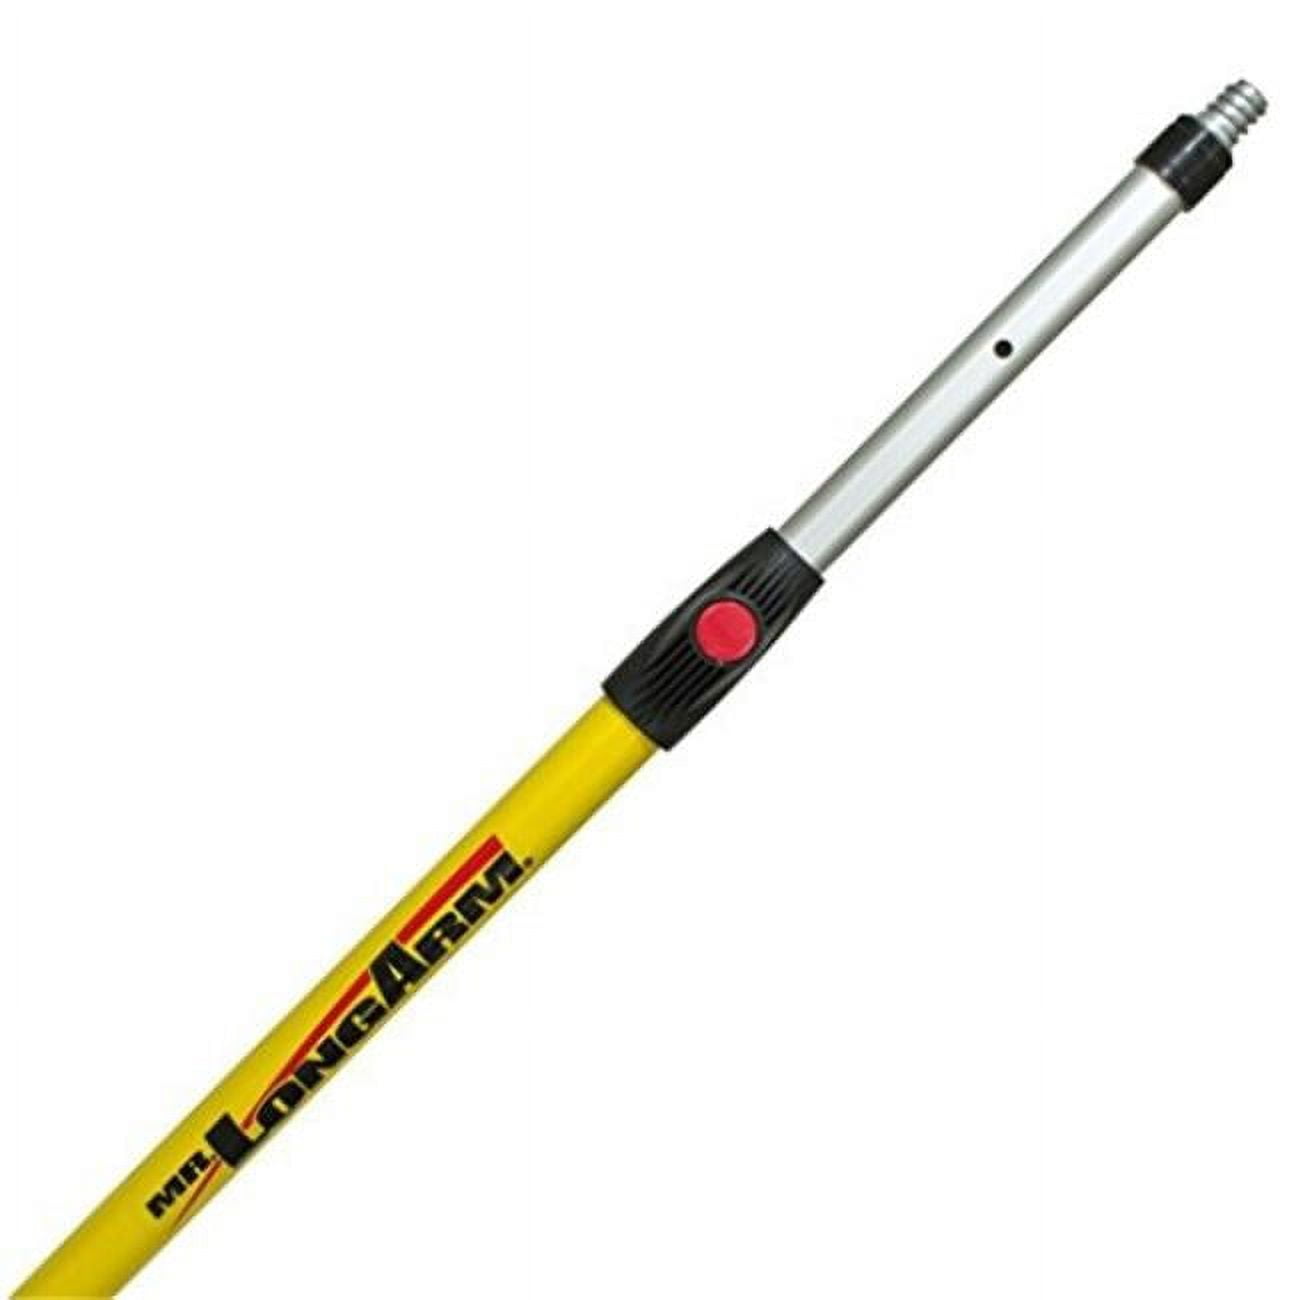 HEAVY DUTY EXTENSION POLE 8 TO 16 F